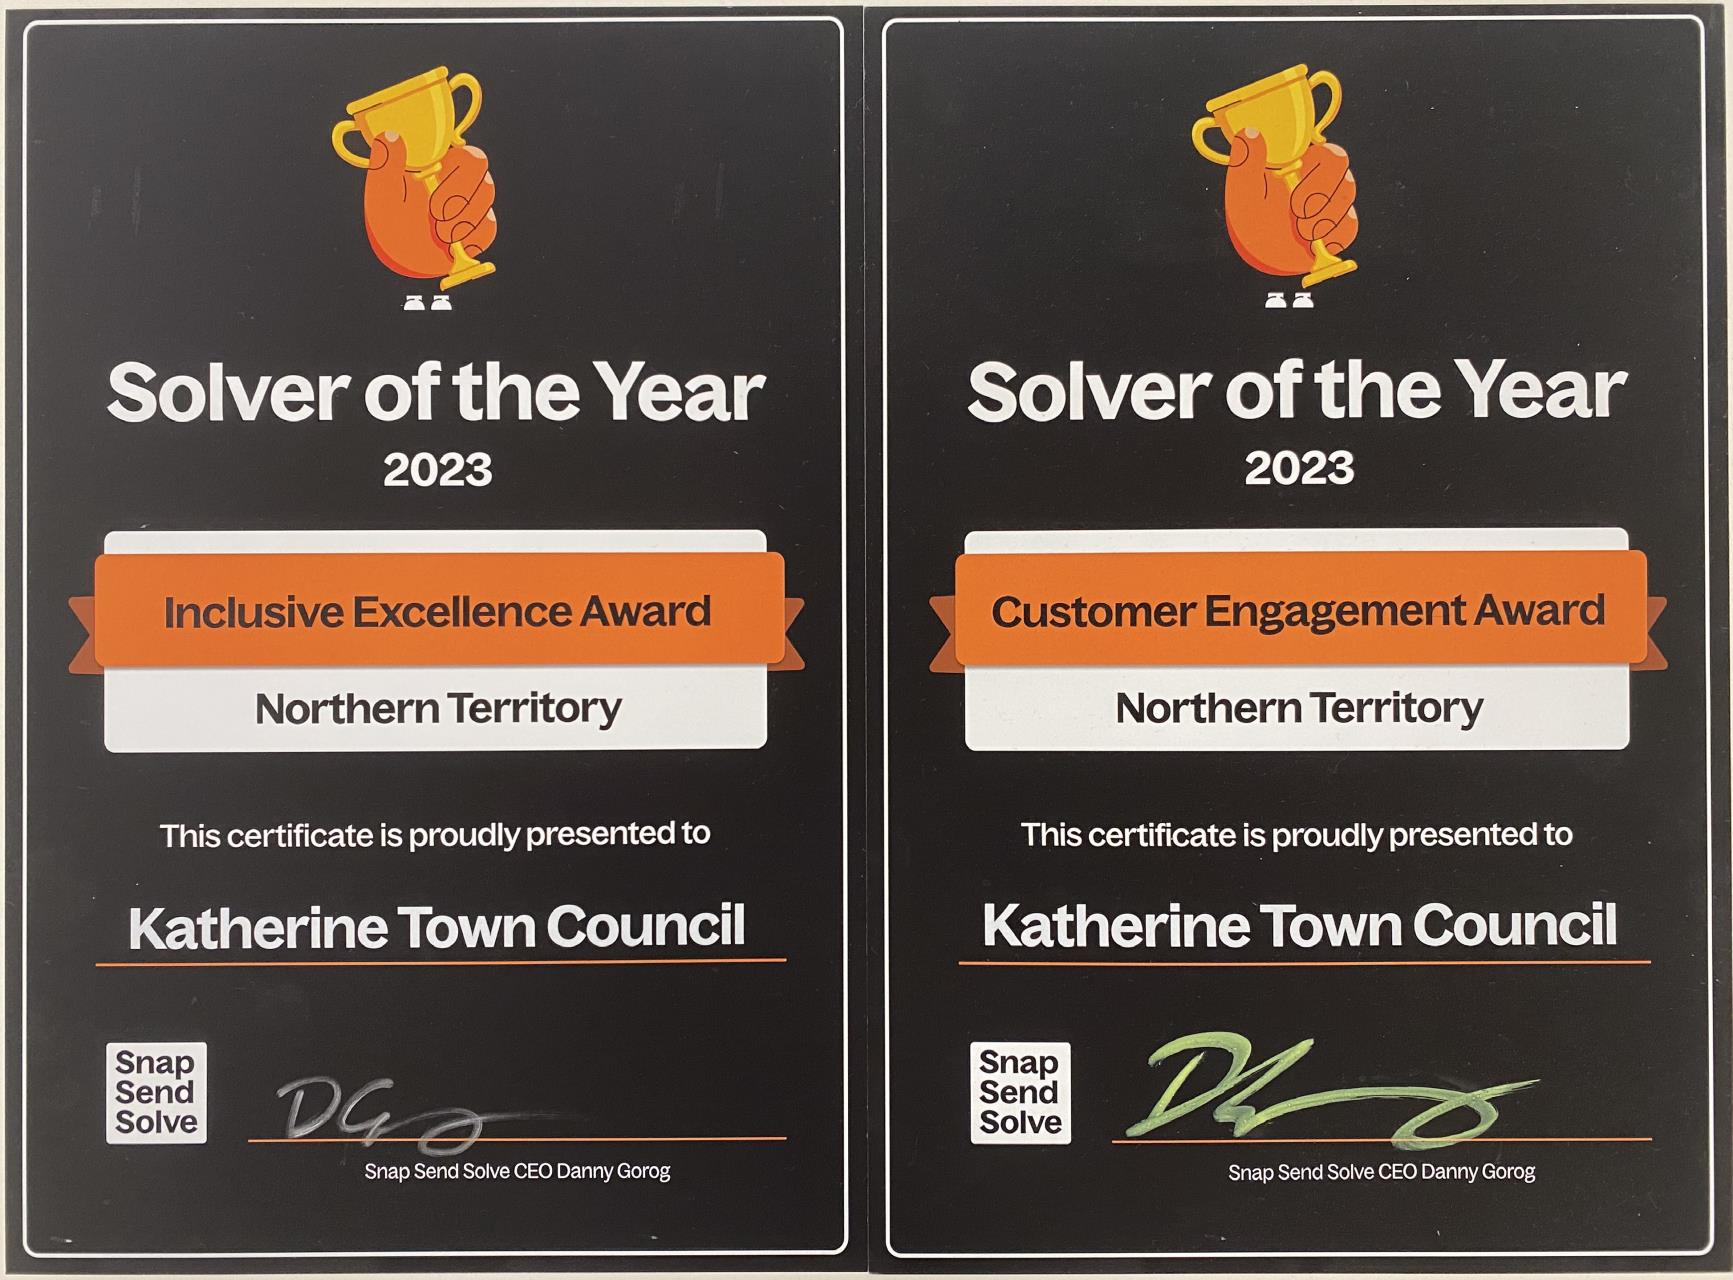 Media Release - Katherine Town Council Wins Dual Snap Send Solve Awards